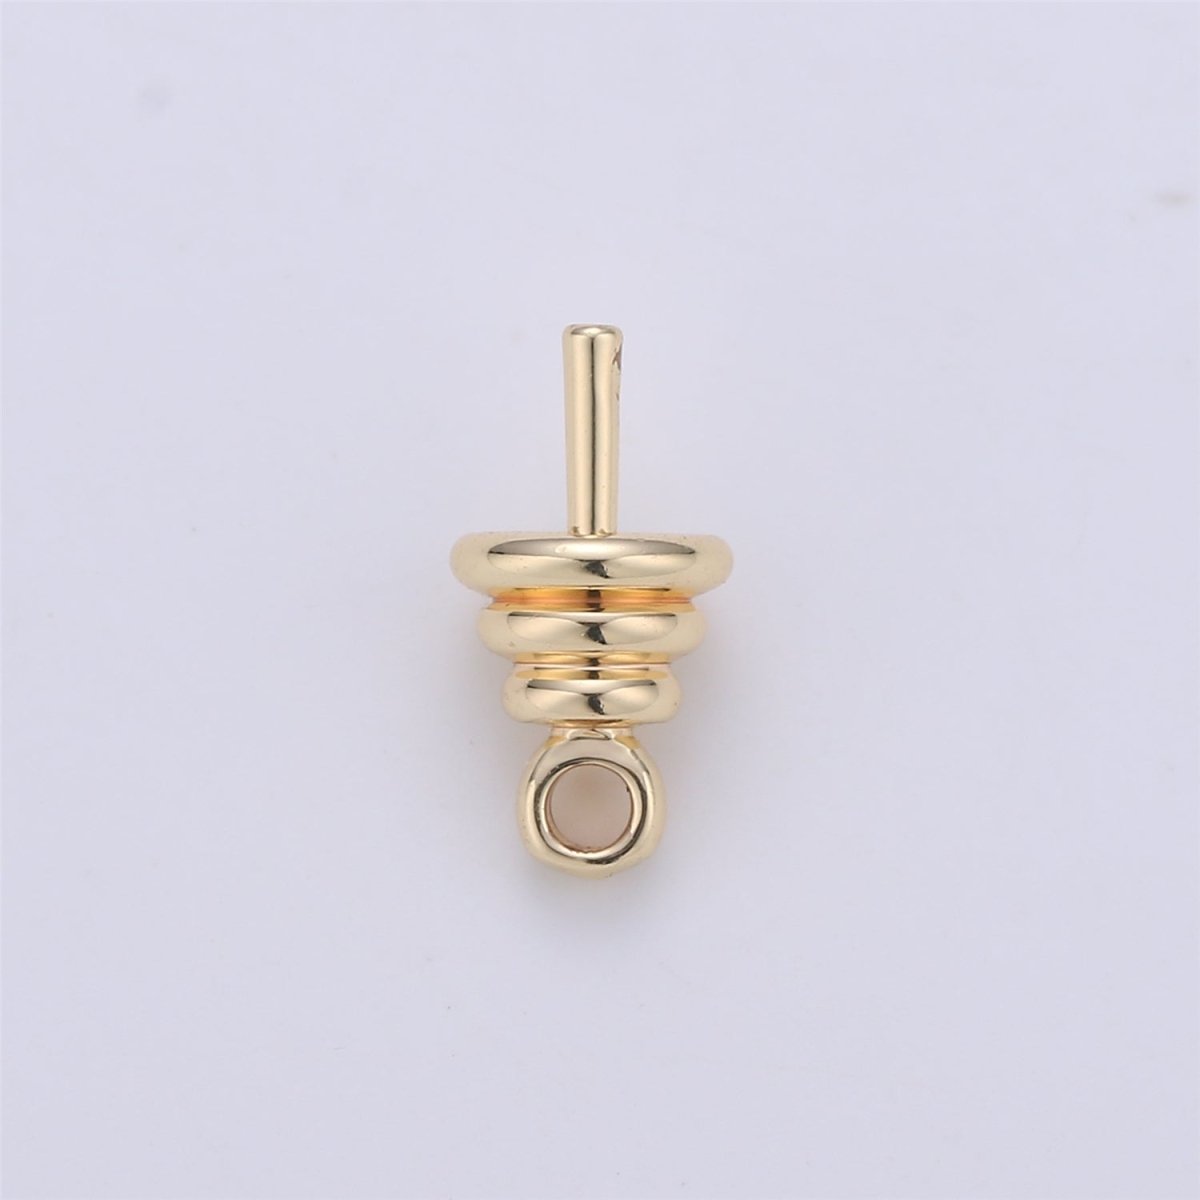 Pendant Bails Top Cup Drilled Pin Pendant Connector Beads cap for DIY Jewelry Making K-210 - DLUXCA